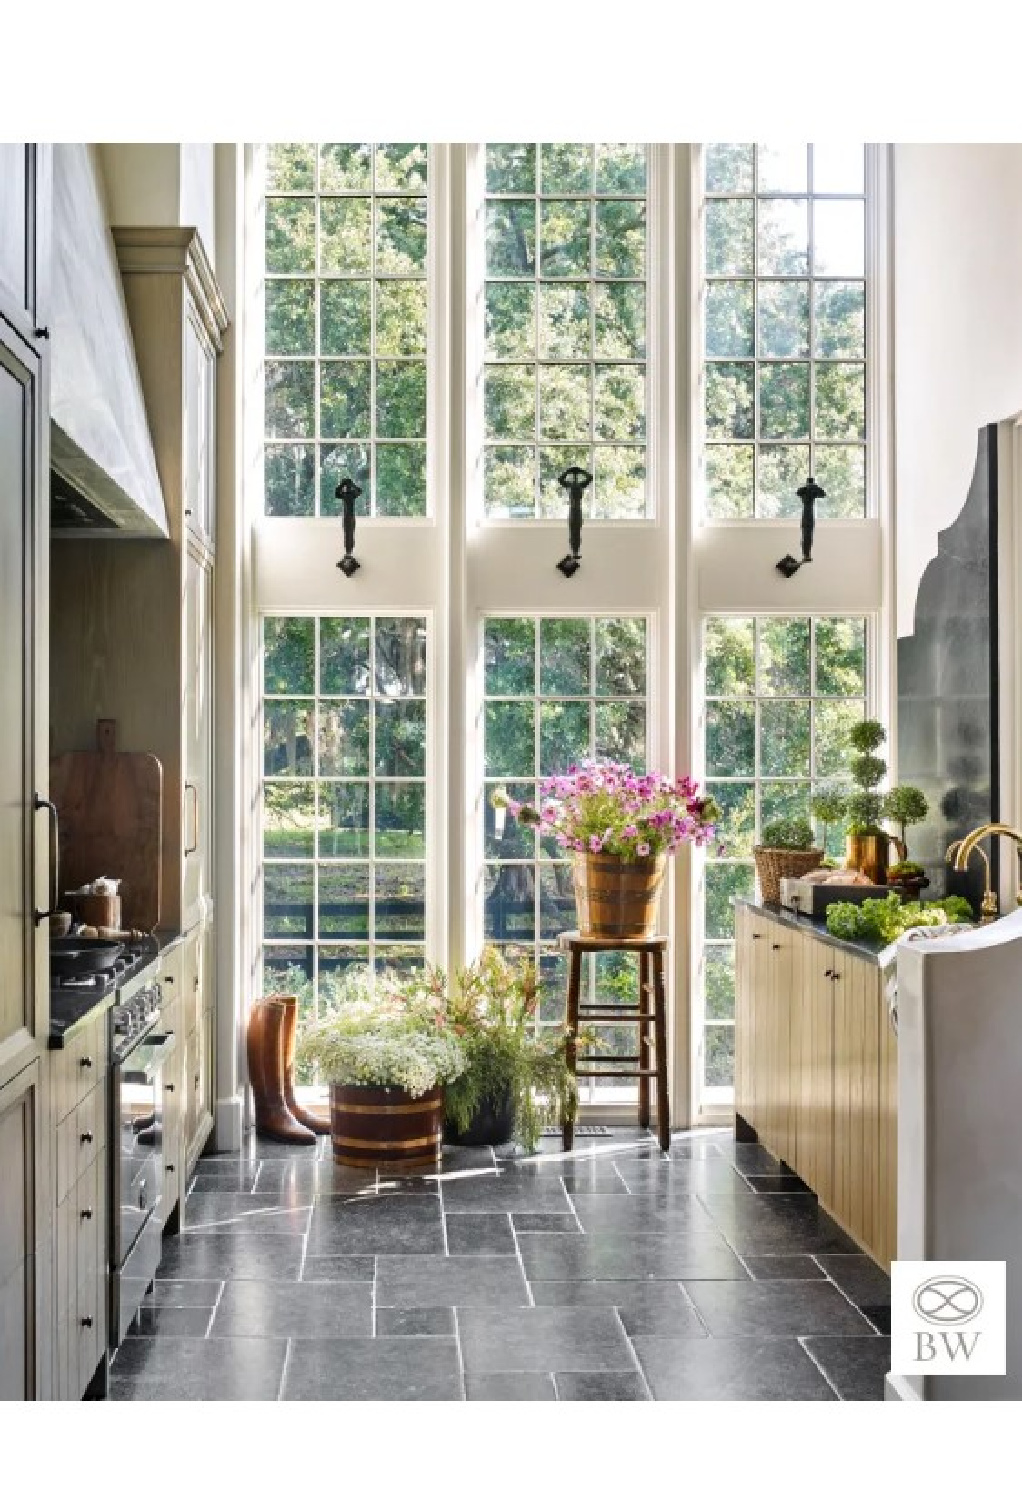 Beautiful kitchen design from Beth Webb's Little Lodge project - photo by Emily Followill. #bethwebb #timelessinteriors